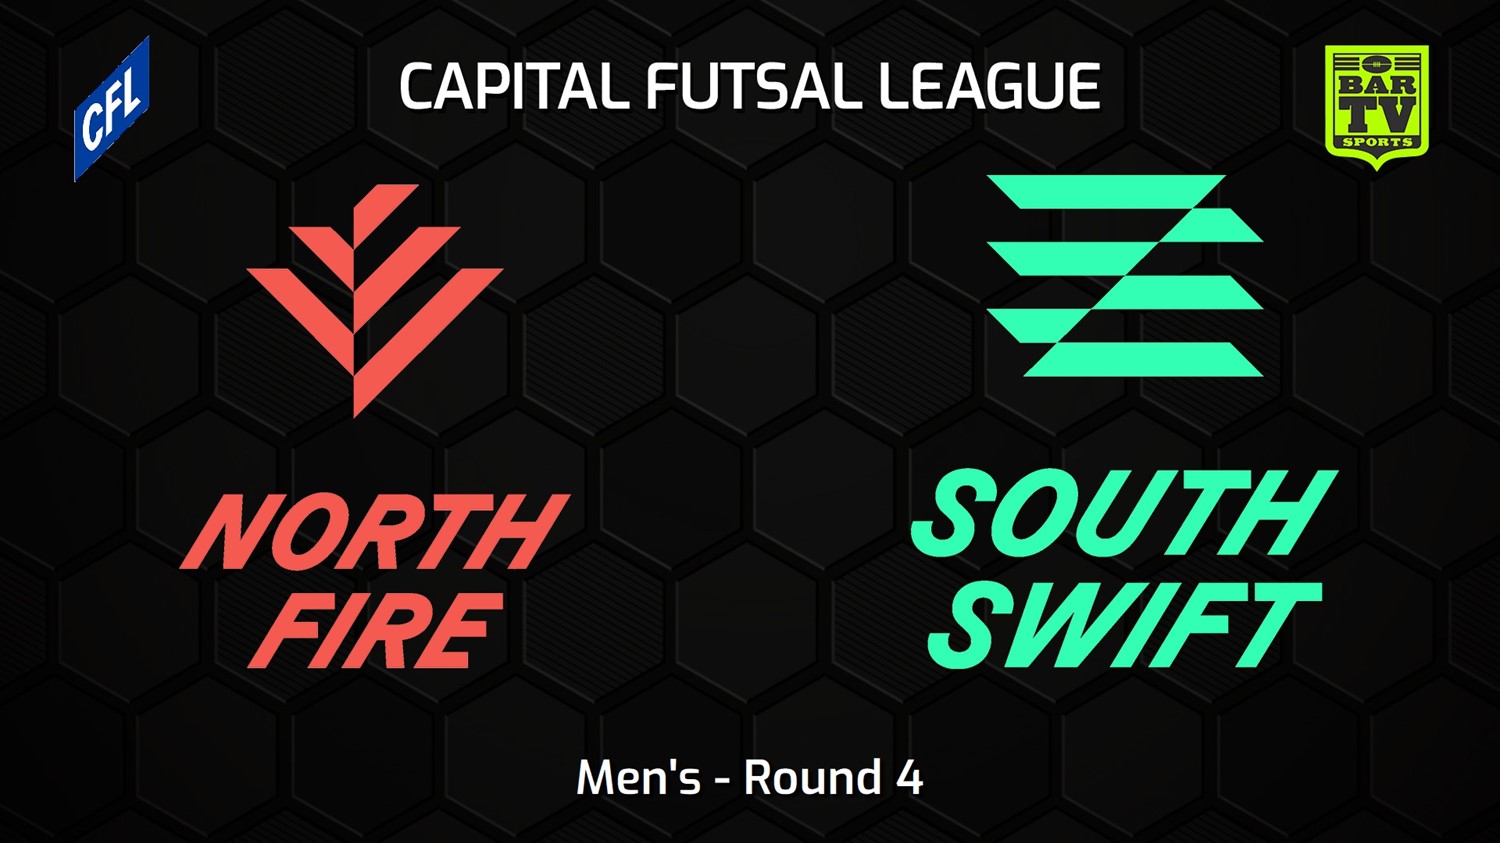 231112-Capital Football Futsal Round 4 - Men's - North Canberra Fire v South Canberra Swift Minigame Slate Image